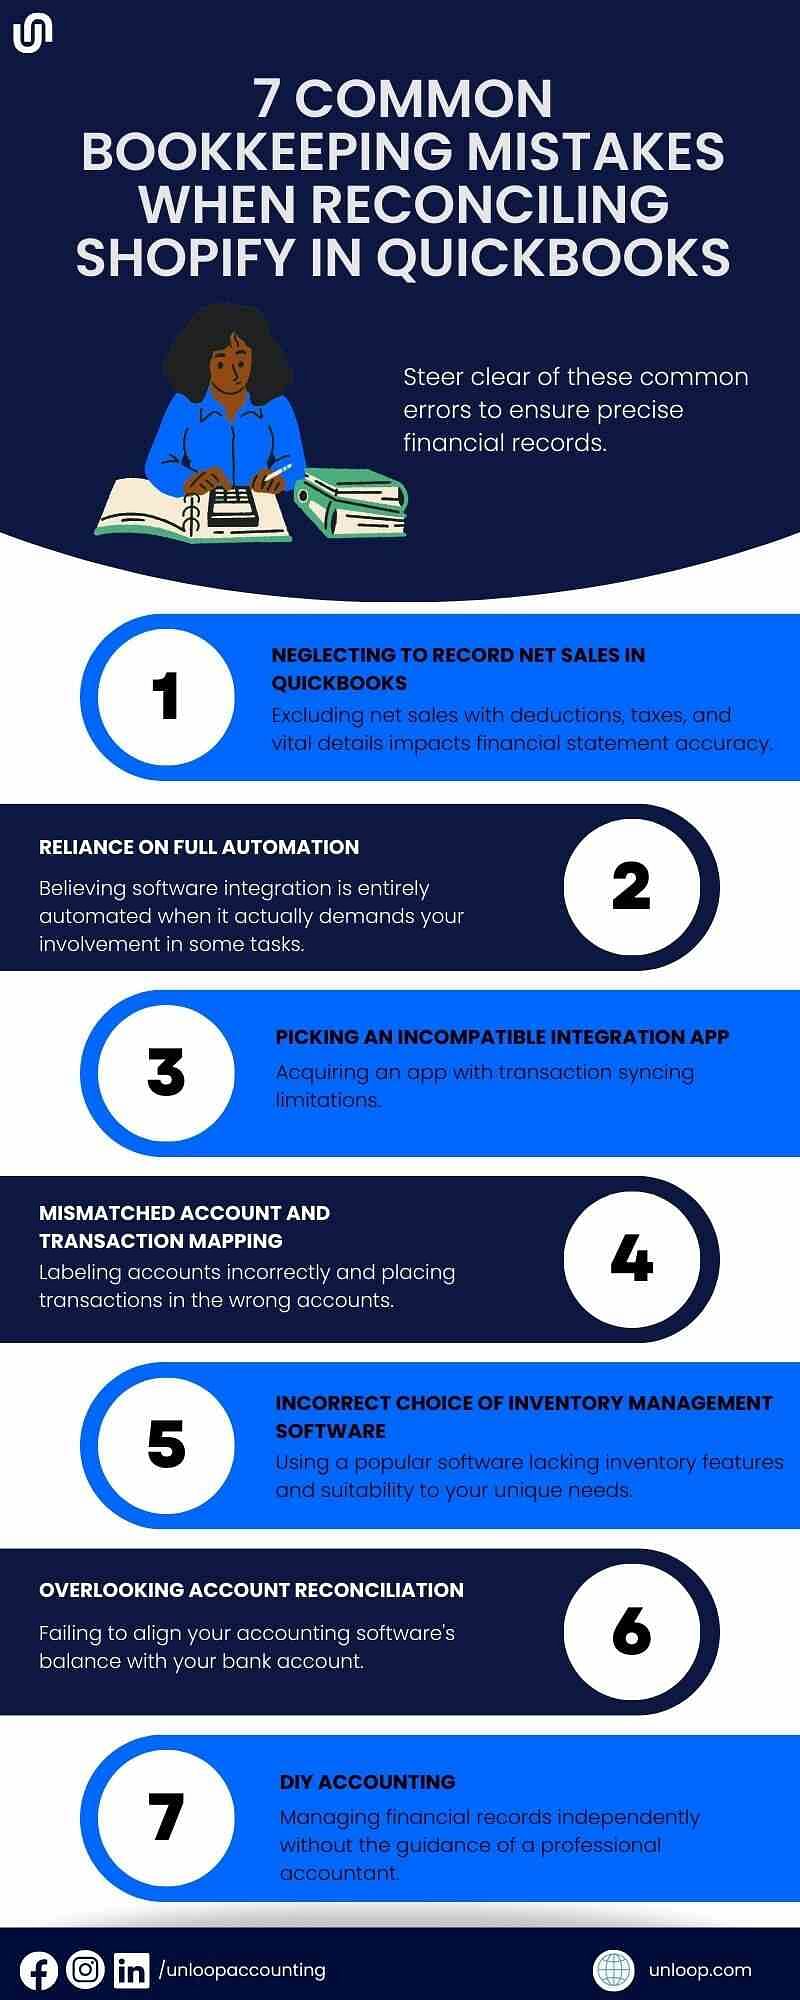 An infographic containing a summary of the 7 bookkeeping mistakes